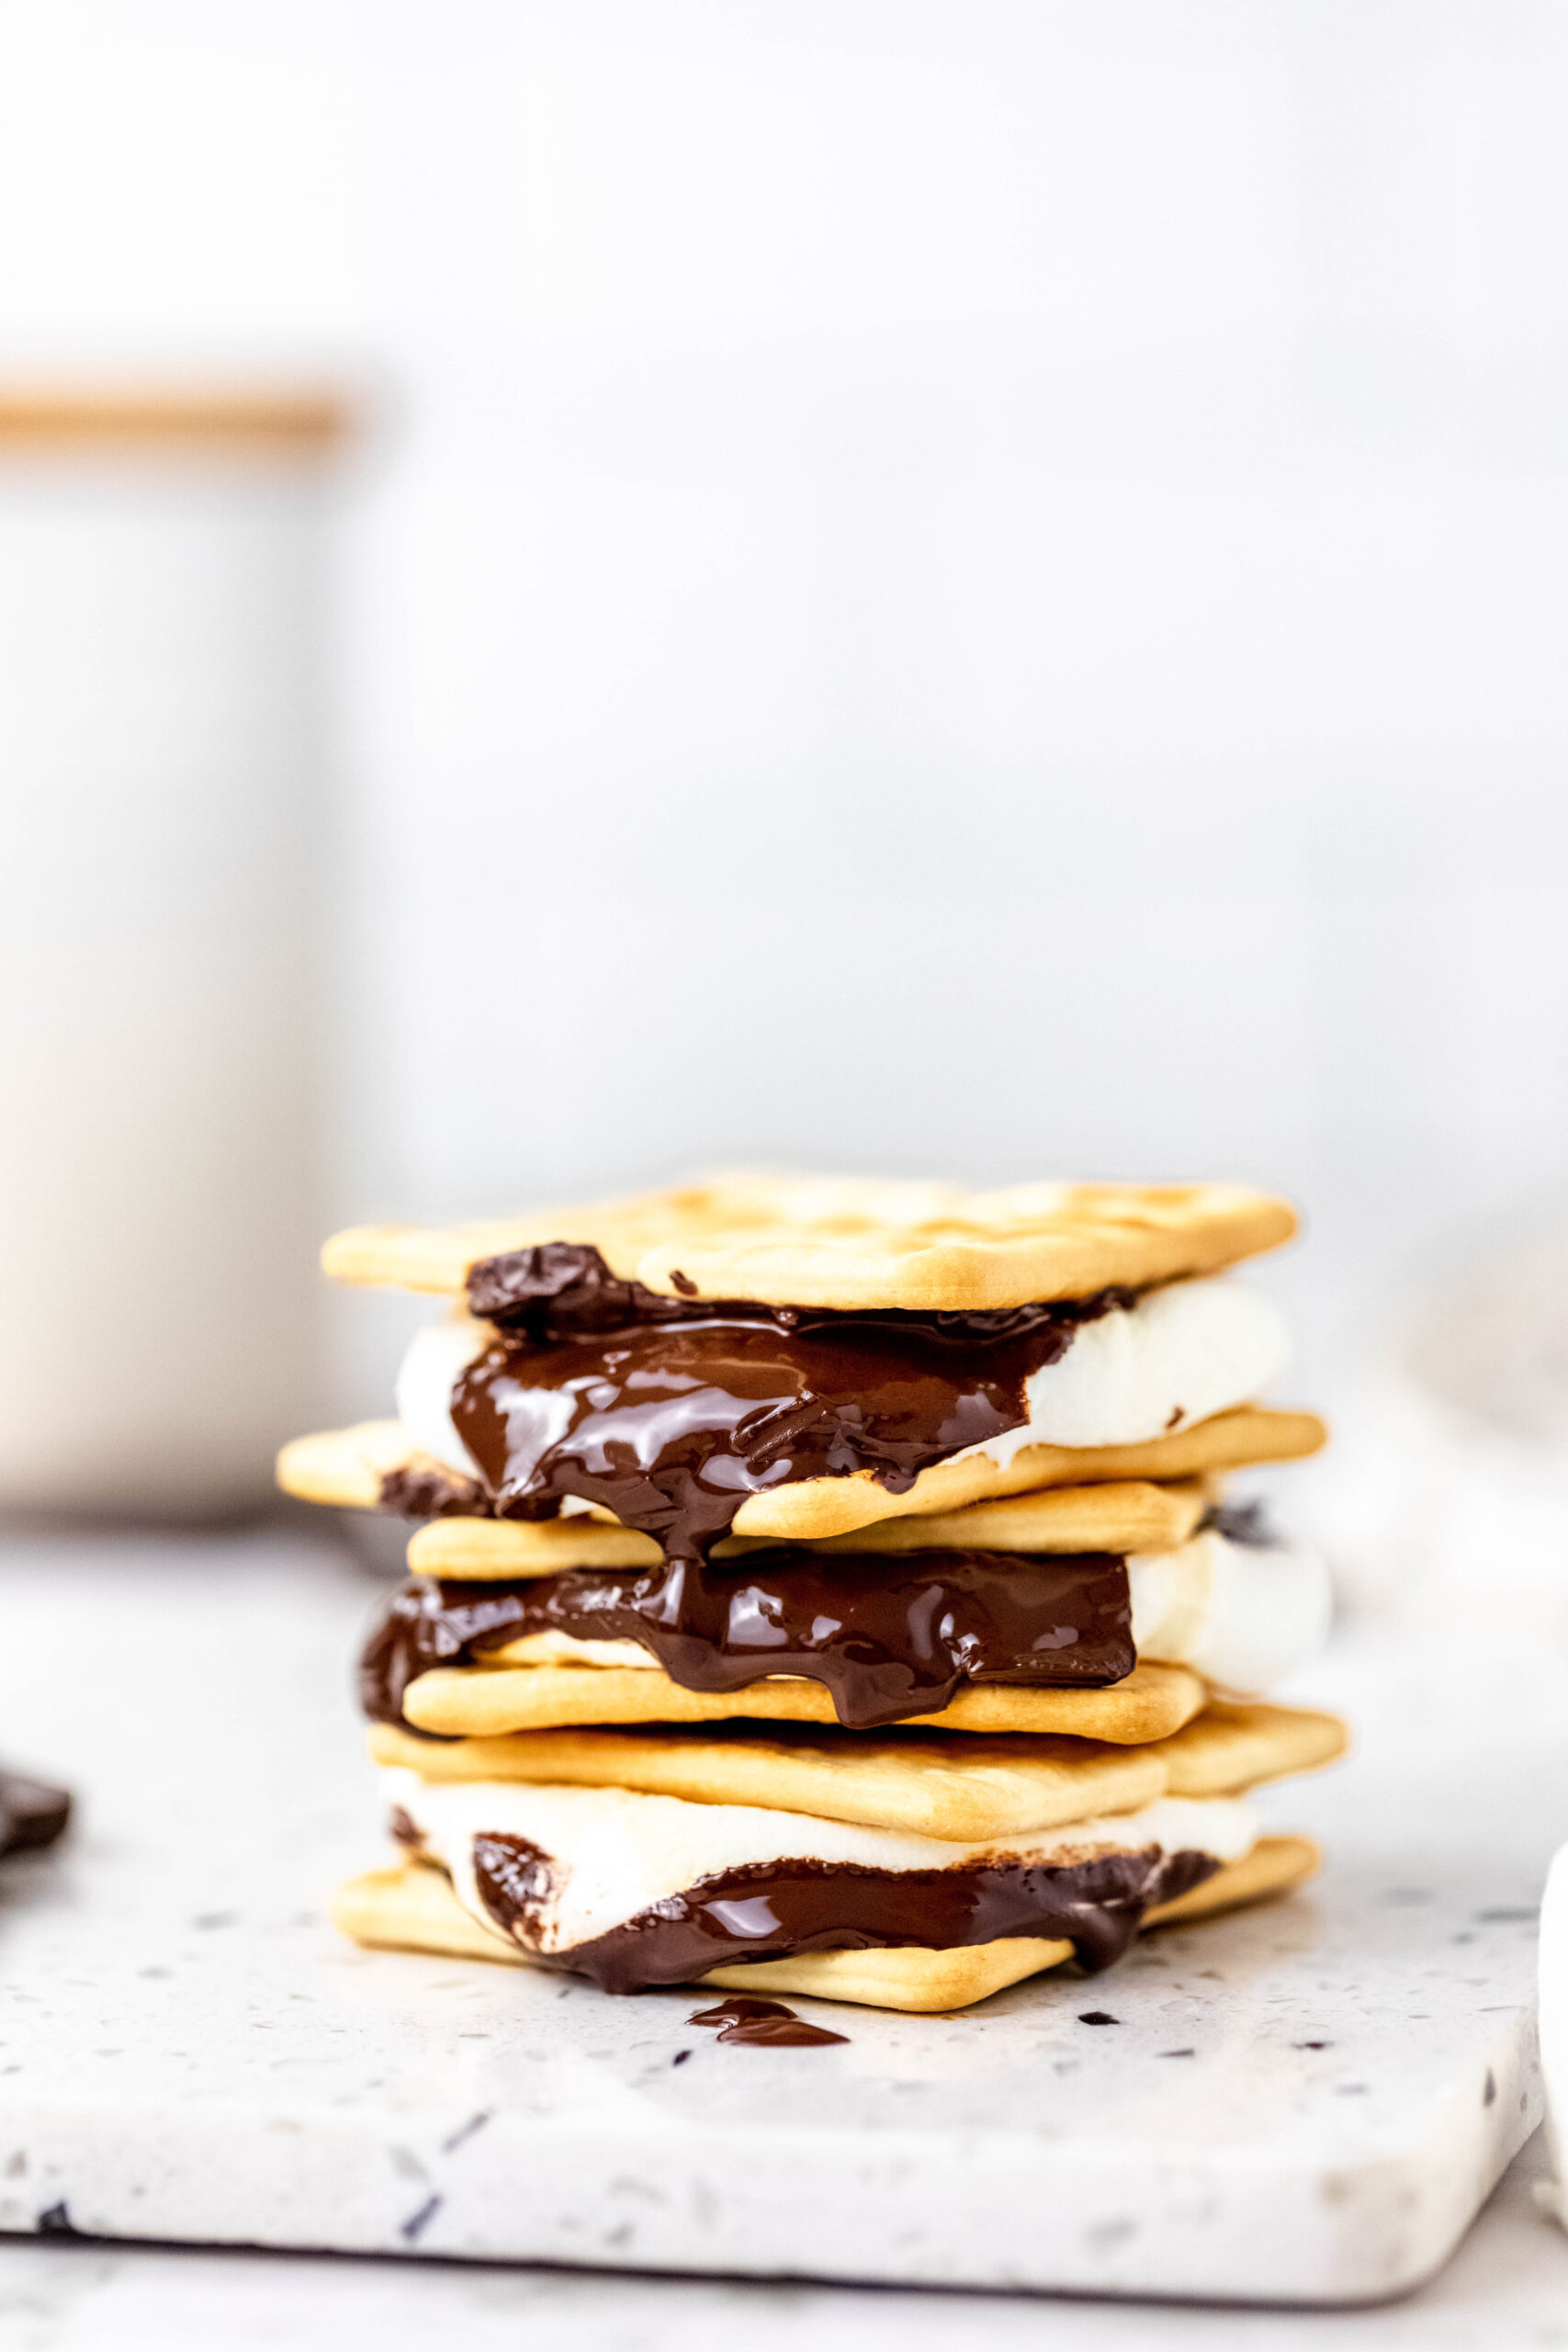 Stack of s'mores with melted chocolate.